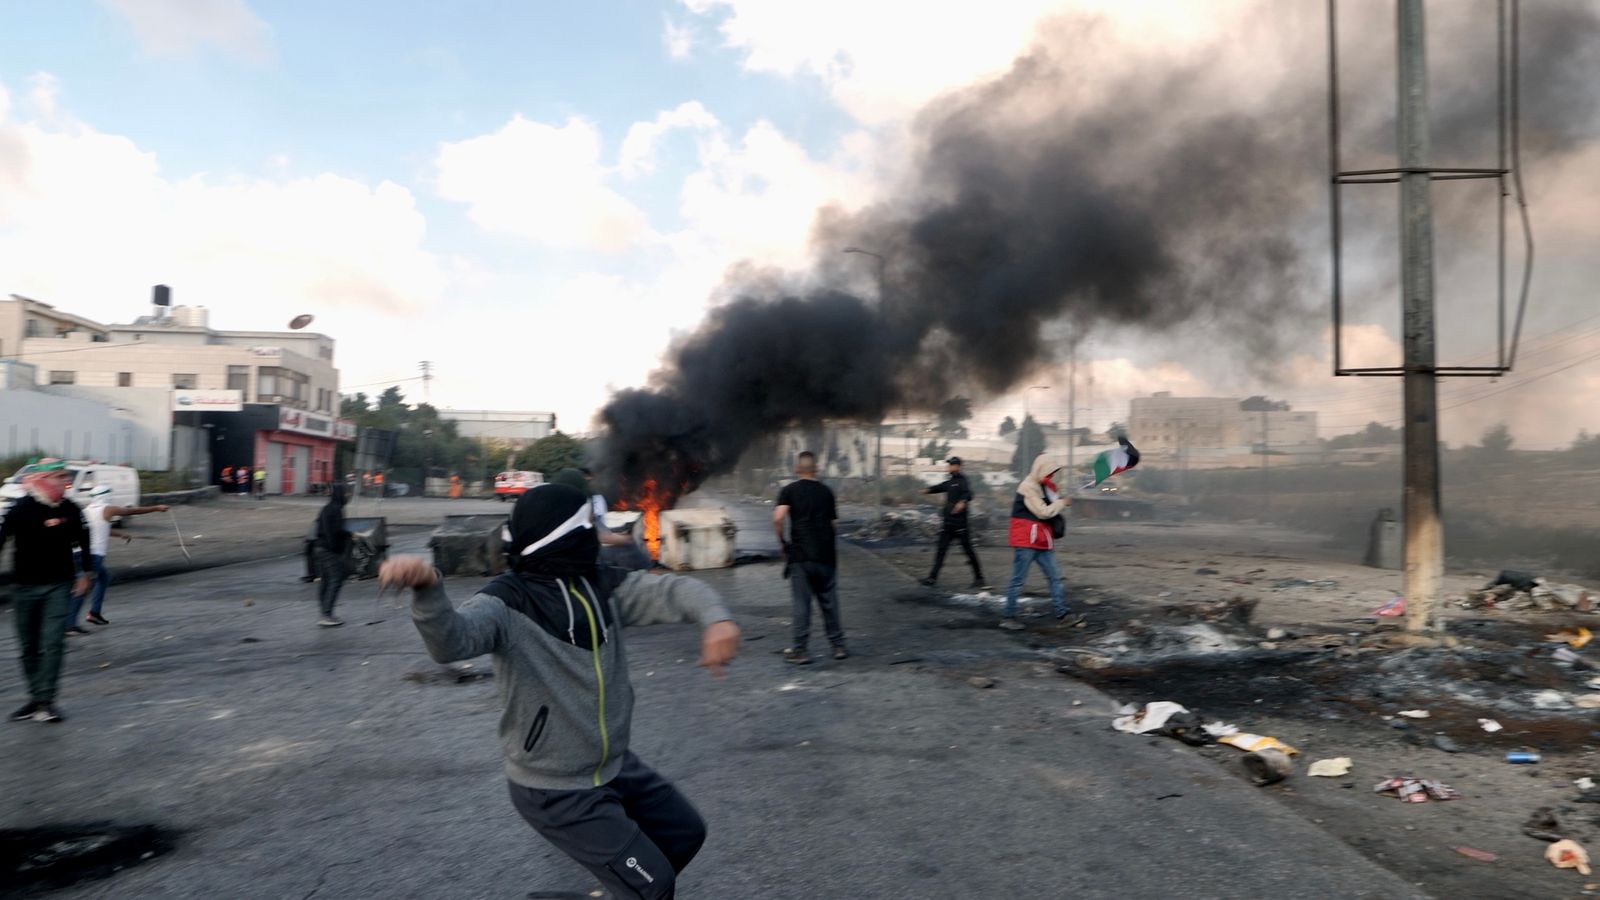 Israel-Hamas war: As protesters throwing stones are shot by Israeli snipers, this is part of ‘normal’ life for the West Bank